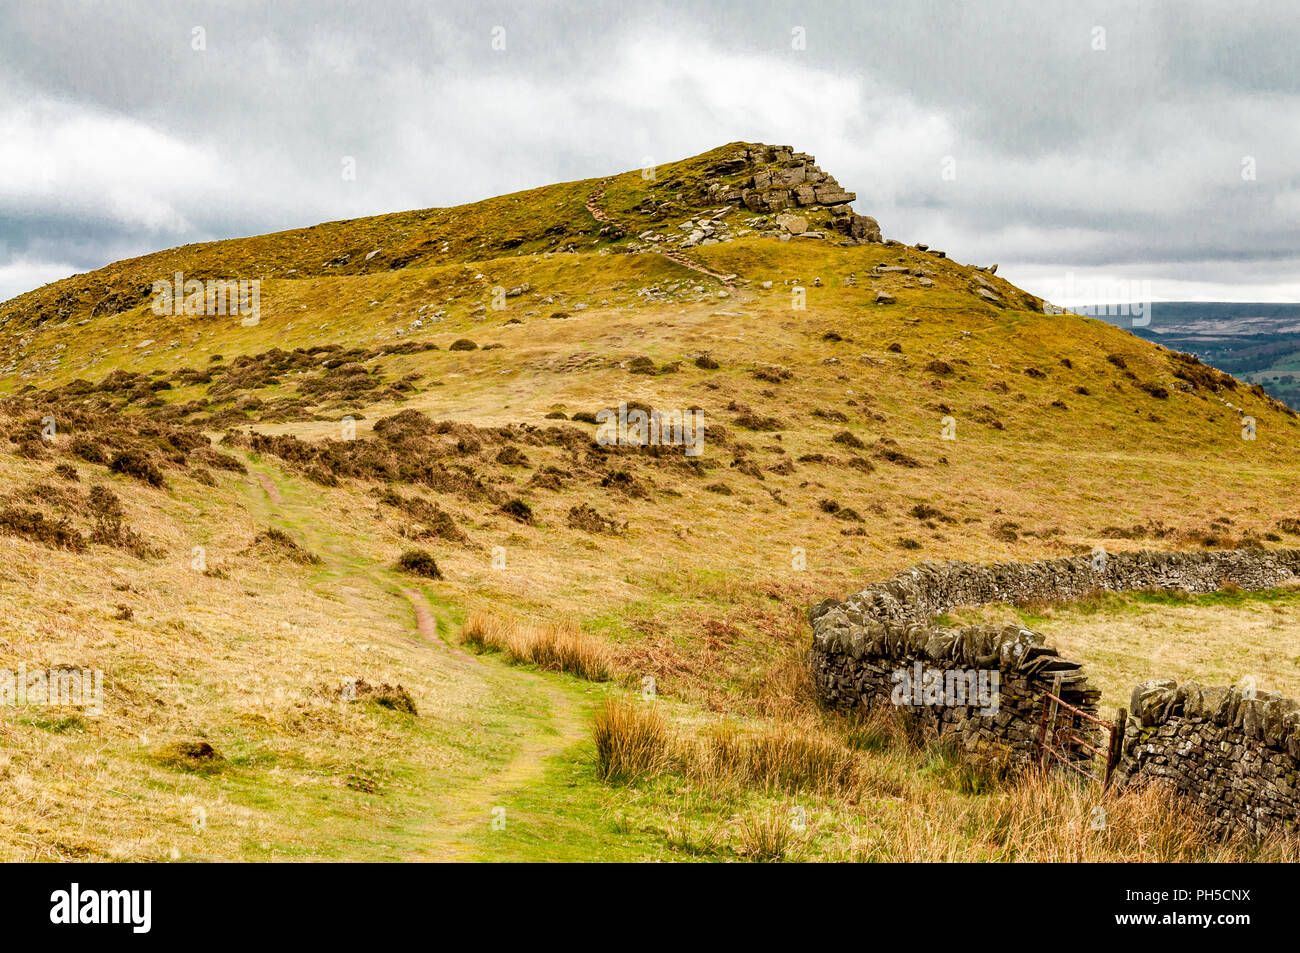 A grass and stone hill and a dry stone wall and gate in Brecon Beacons National Park, Powys, Wales Stock Photo